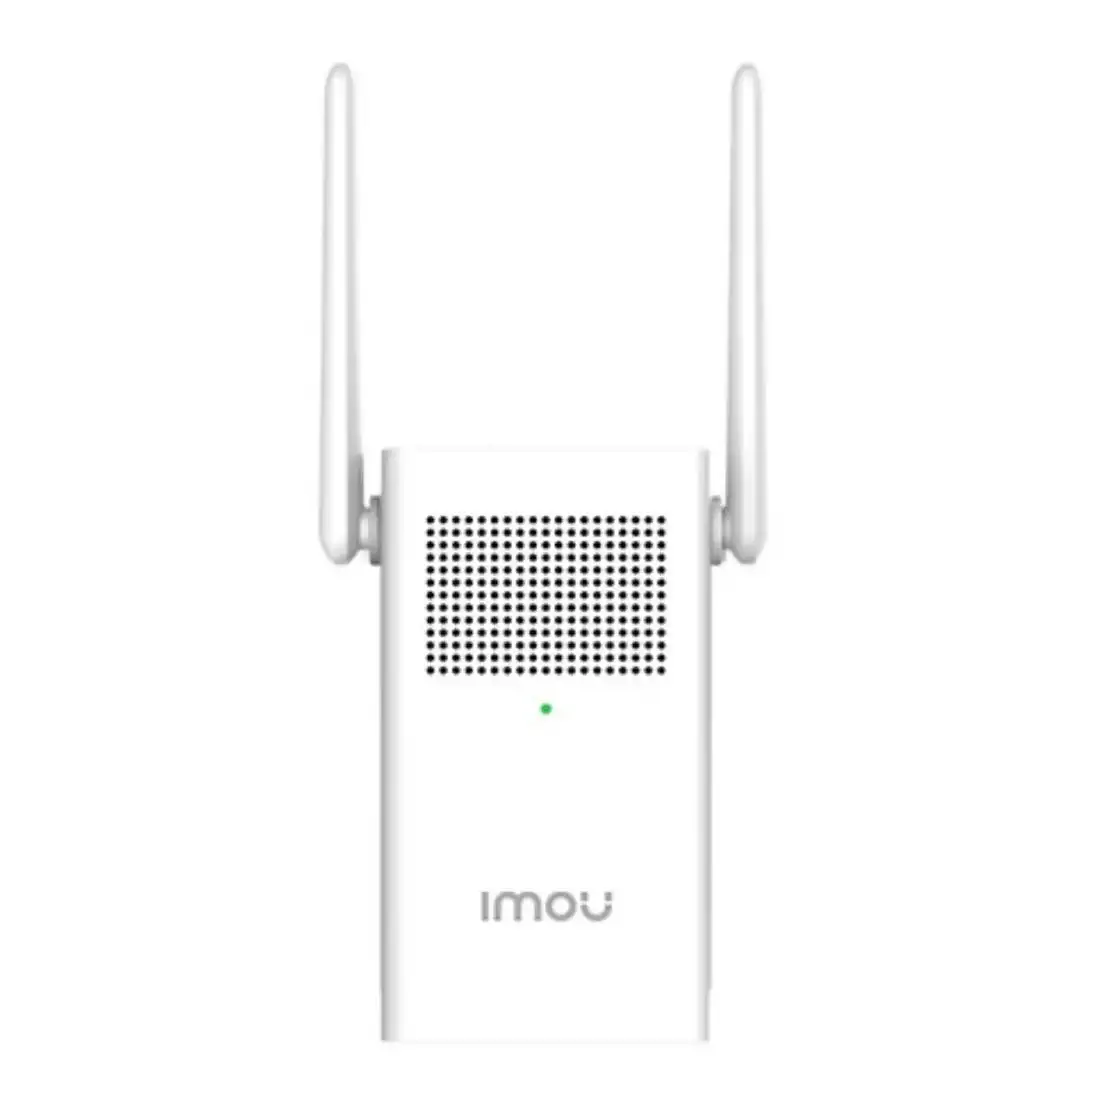 Imou DS21 Chime & Wi-Fi Repeater - White